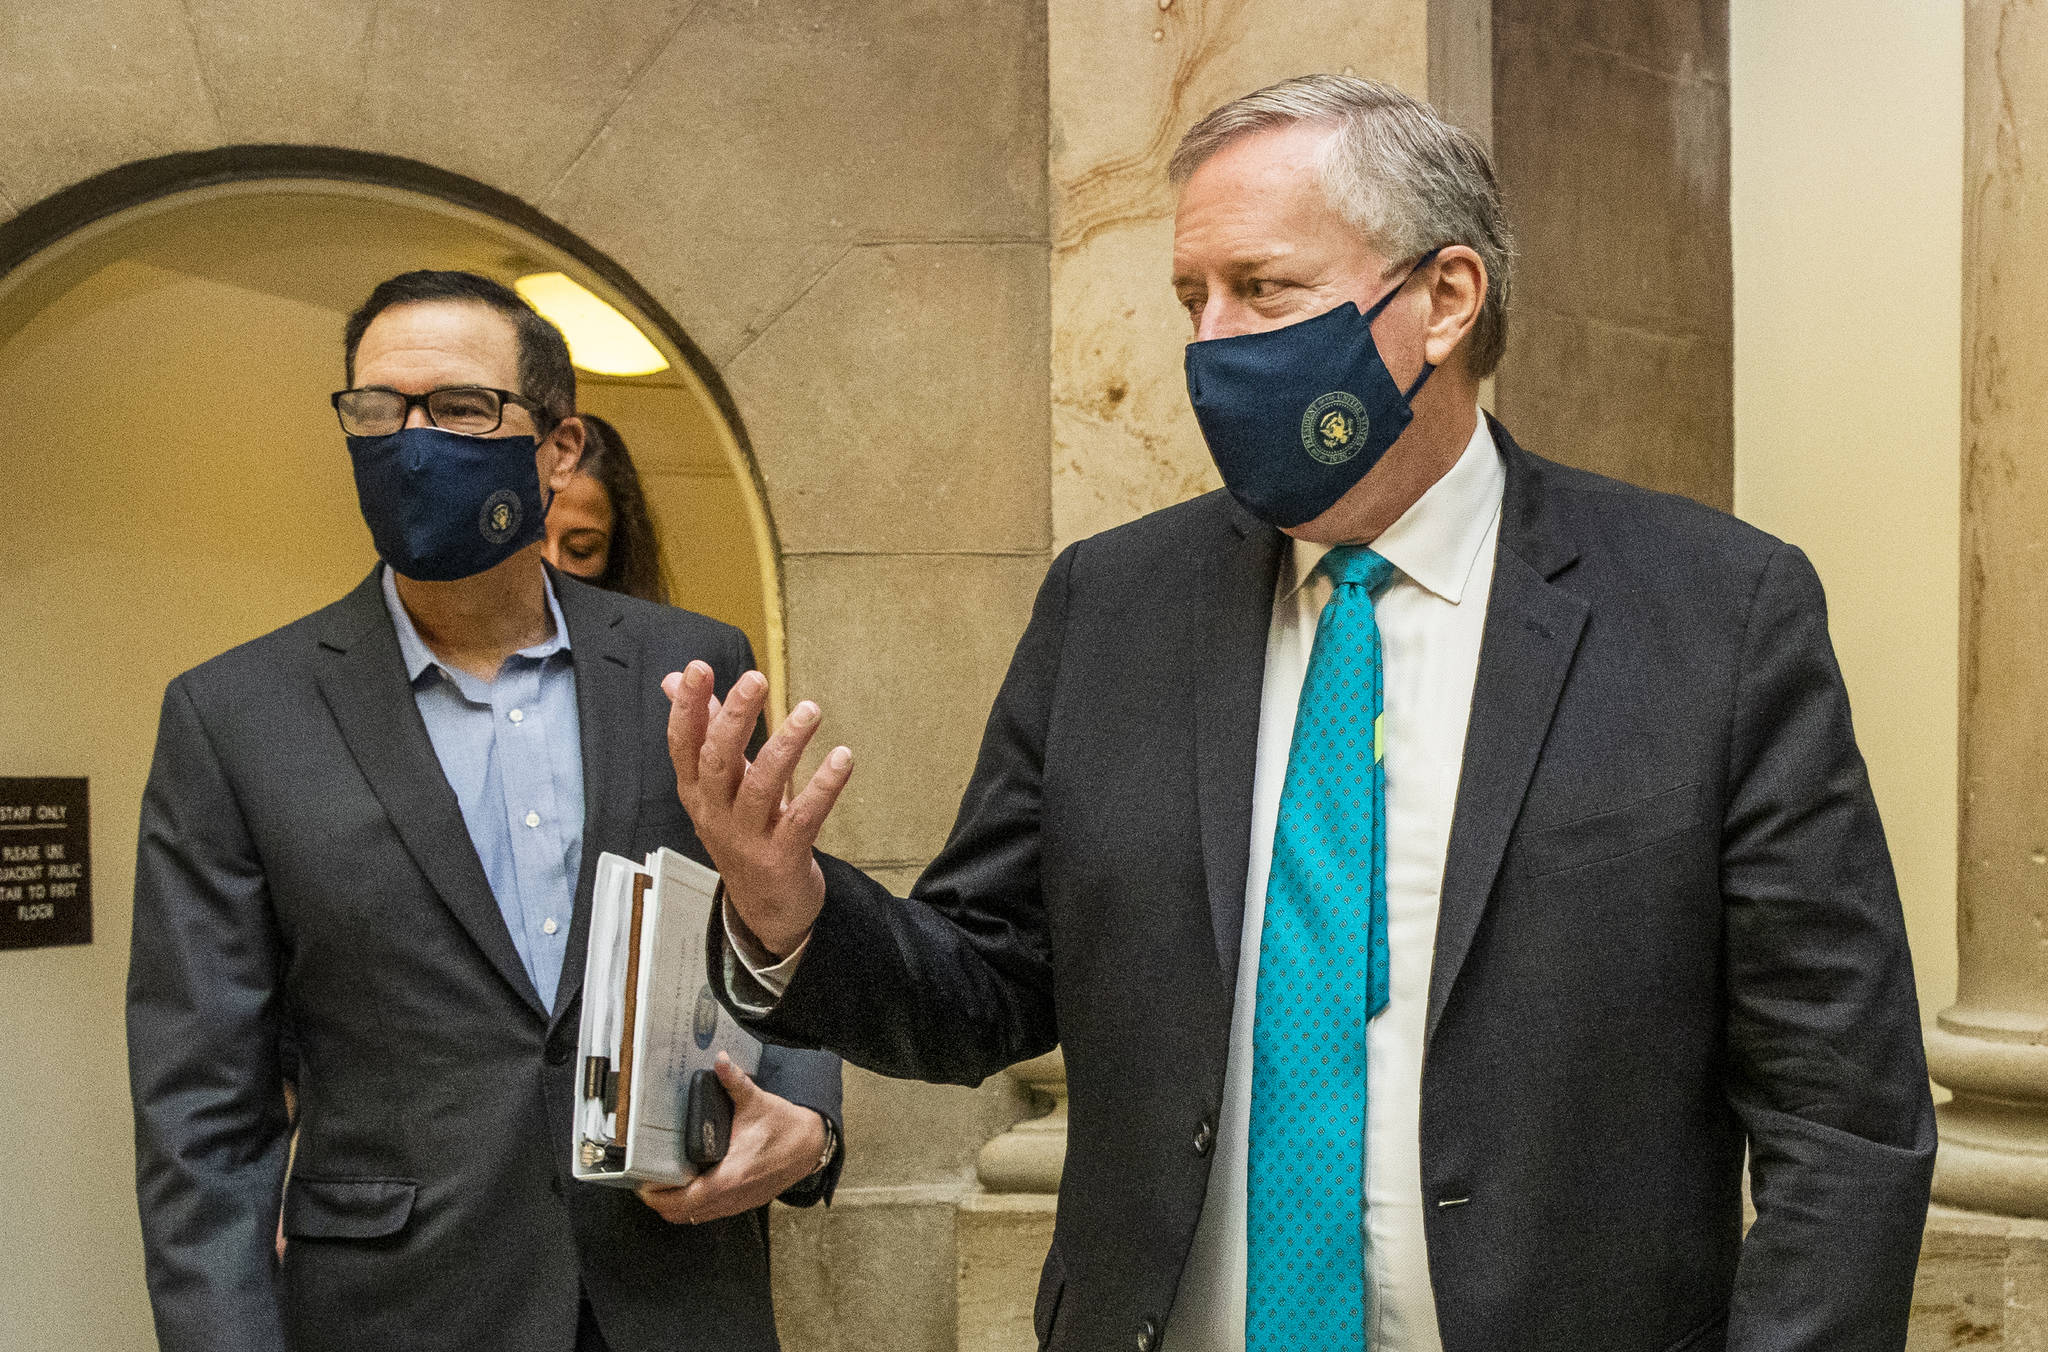 White House chief of staff Mark Meadows, right, and Treasury Secretary Steven Mnuchin, arrive at the office of House Speaker Nancy Pelosi at the Capitol to resume talks on a COVID-19 relief bill, Saturday, Aug. 1, 2020, in Washington. (AP Photo / Manuel Balce Ceneta)